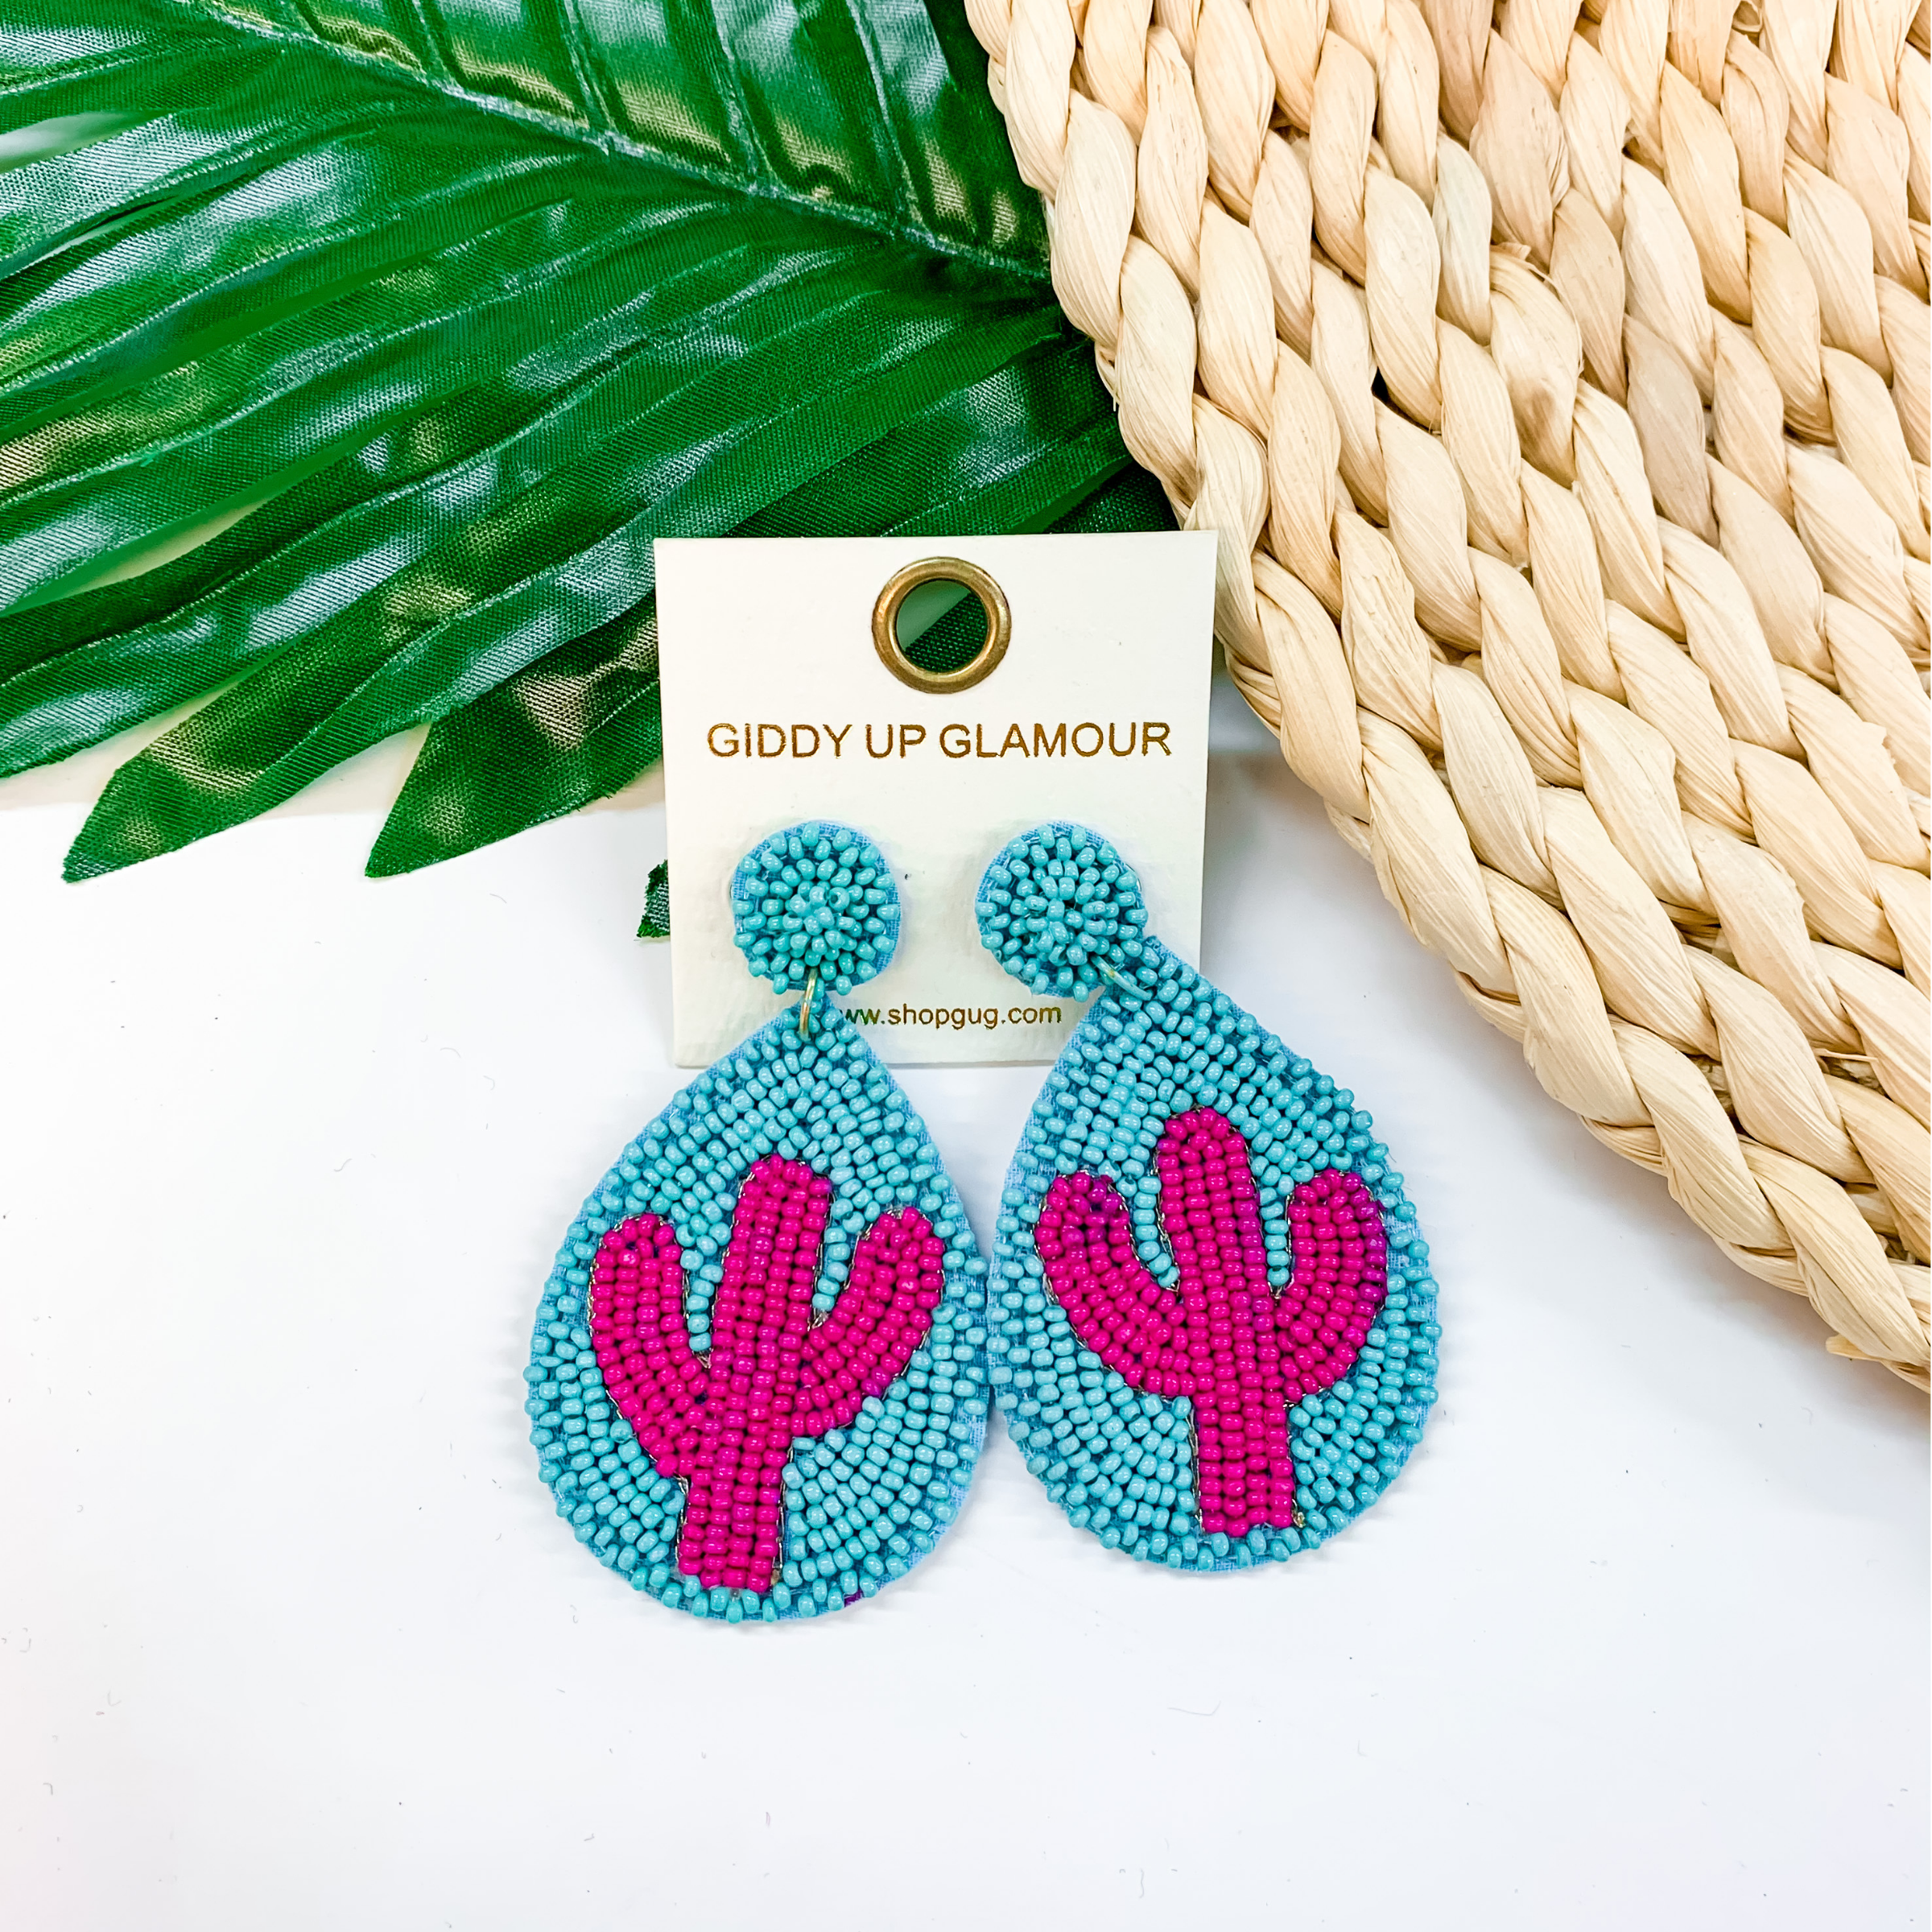 Lookin' Sharp Seed Bead Cactus Teardrop Earrings In Turquoise and Fuchsia - Giddy Up Glamour Boutique